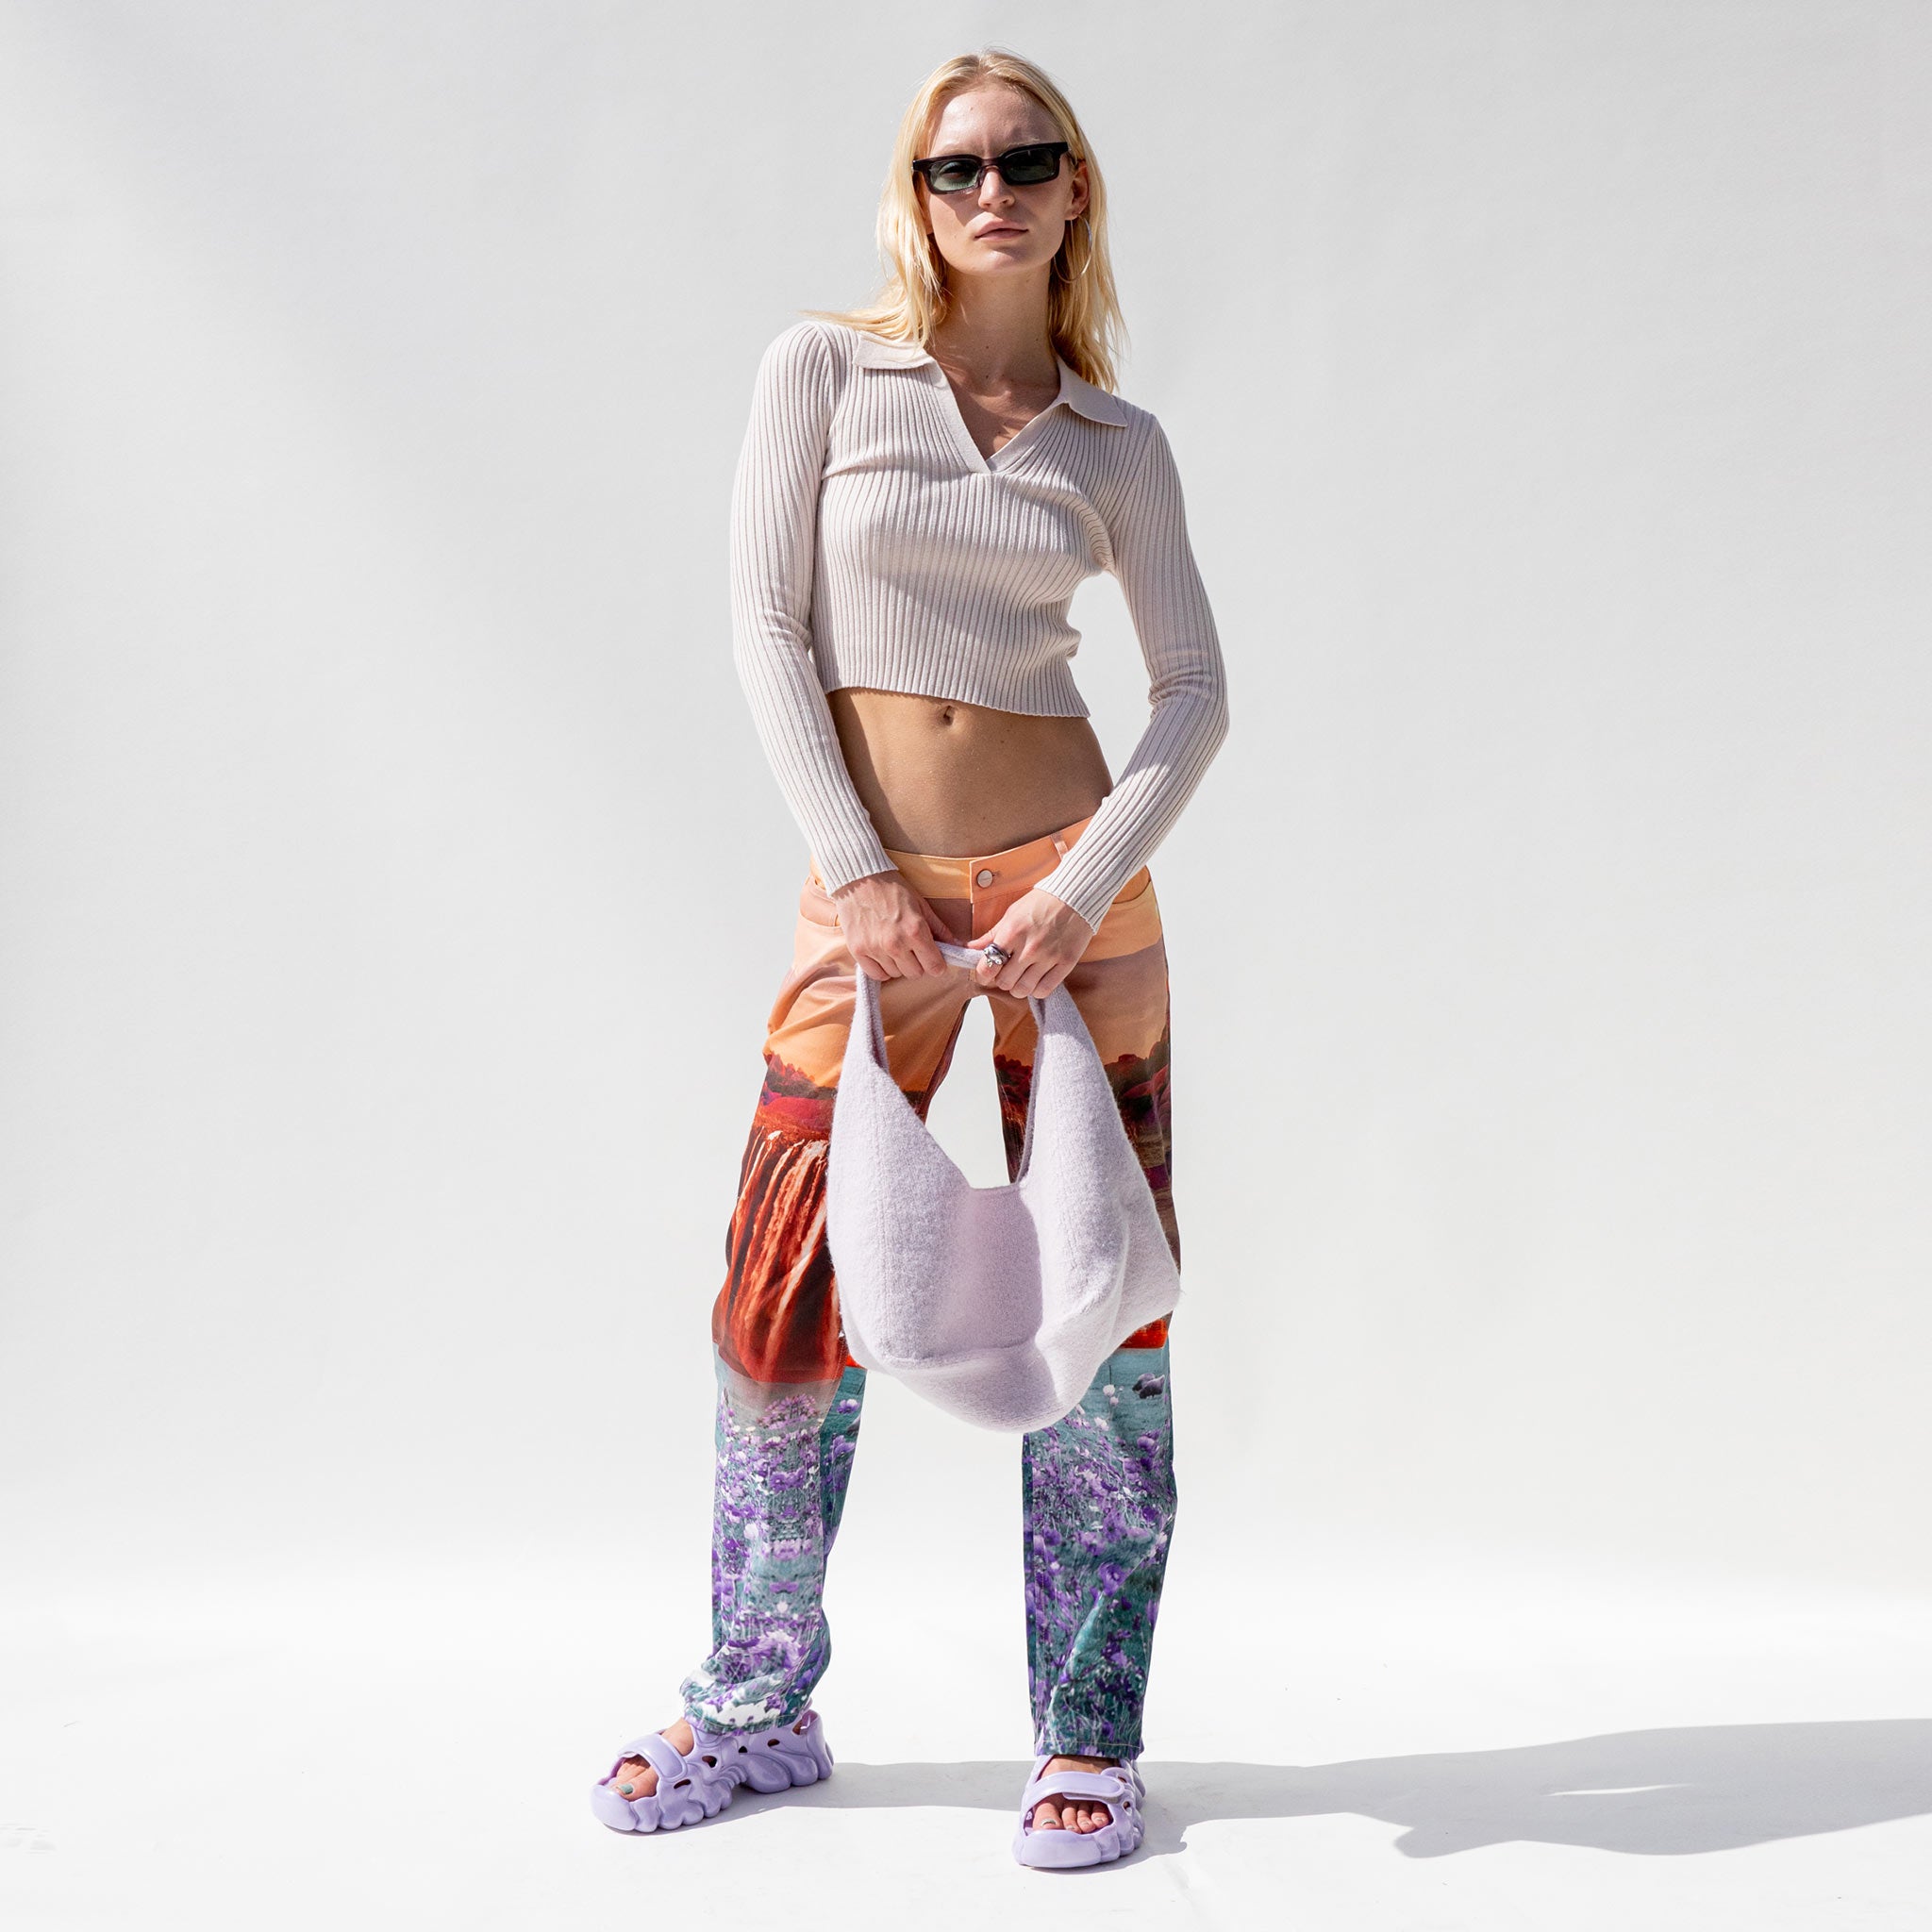 Miaou Atlas Pants featuring collaged landscape prints, full outfit view as worn by a model.